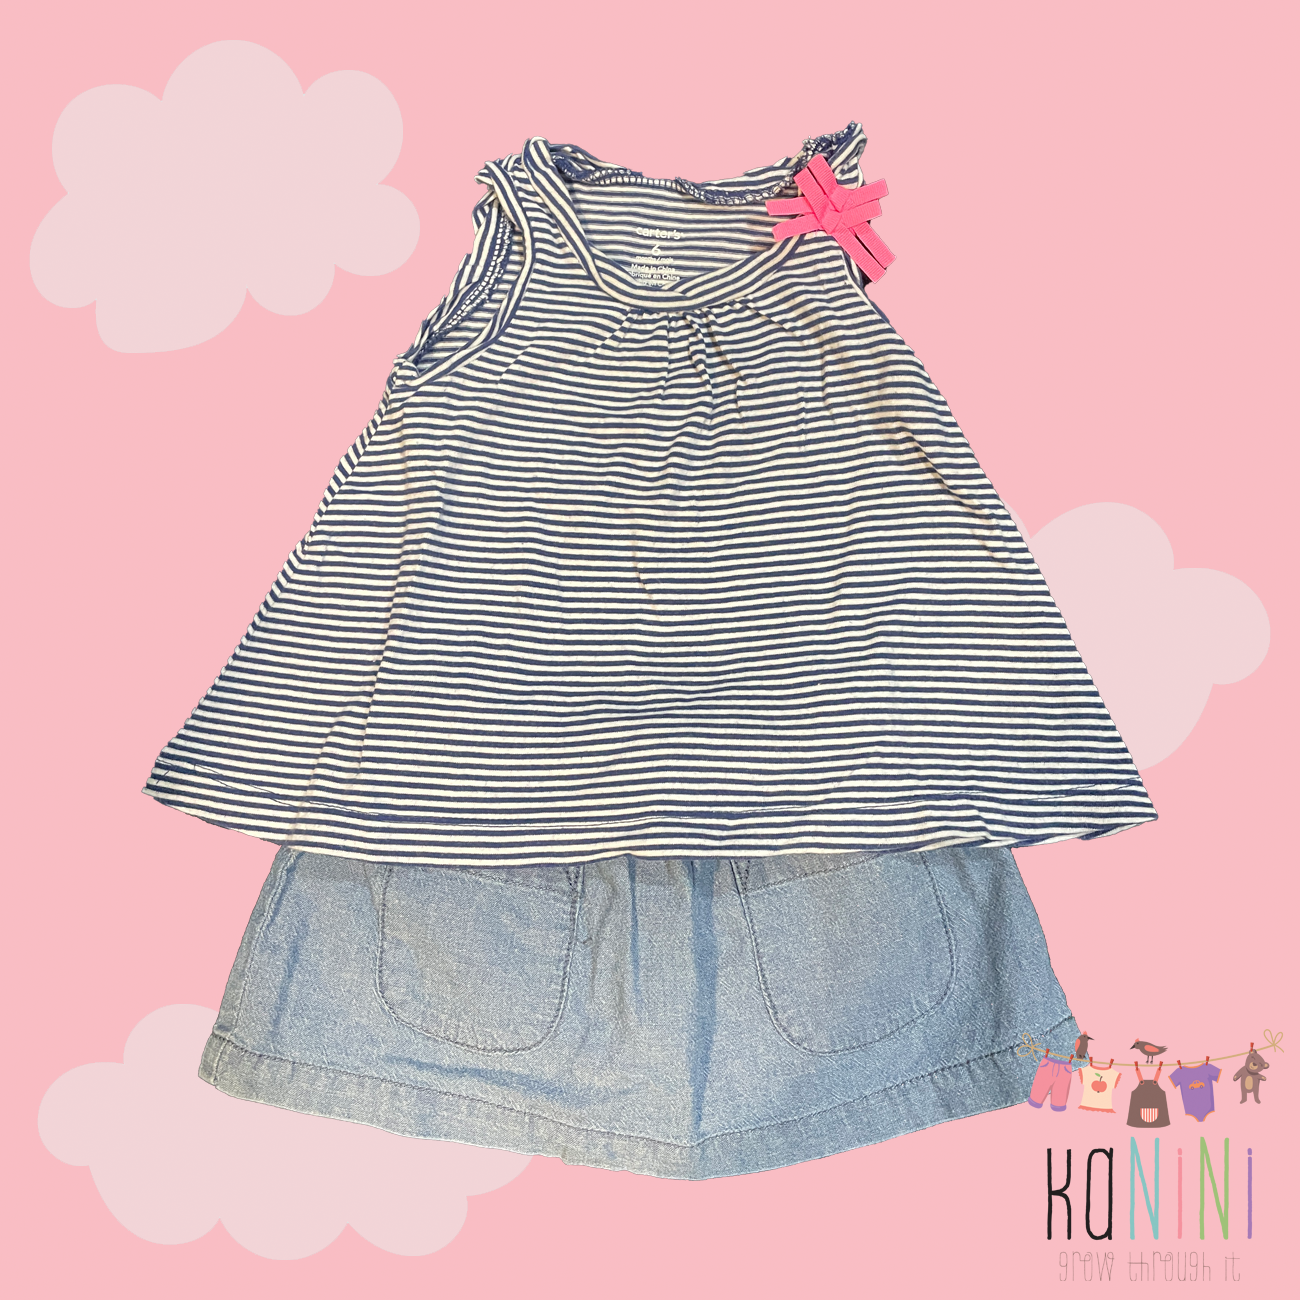 Featured image for “Carter's 6 Months Girls Skirt & Top Set”